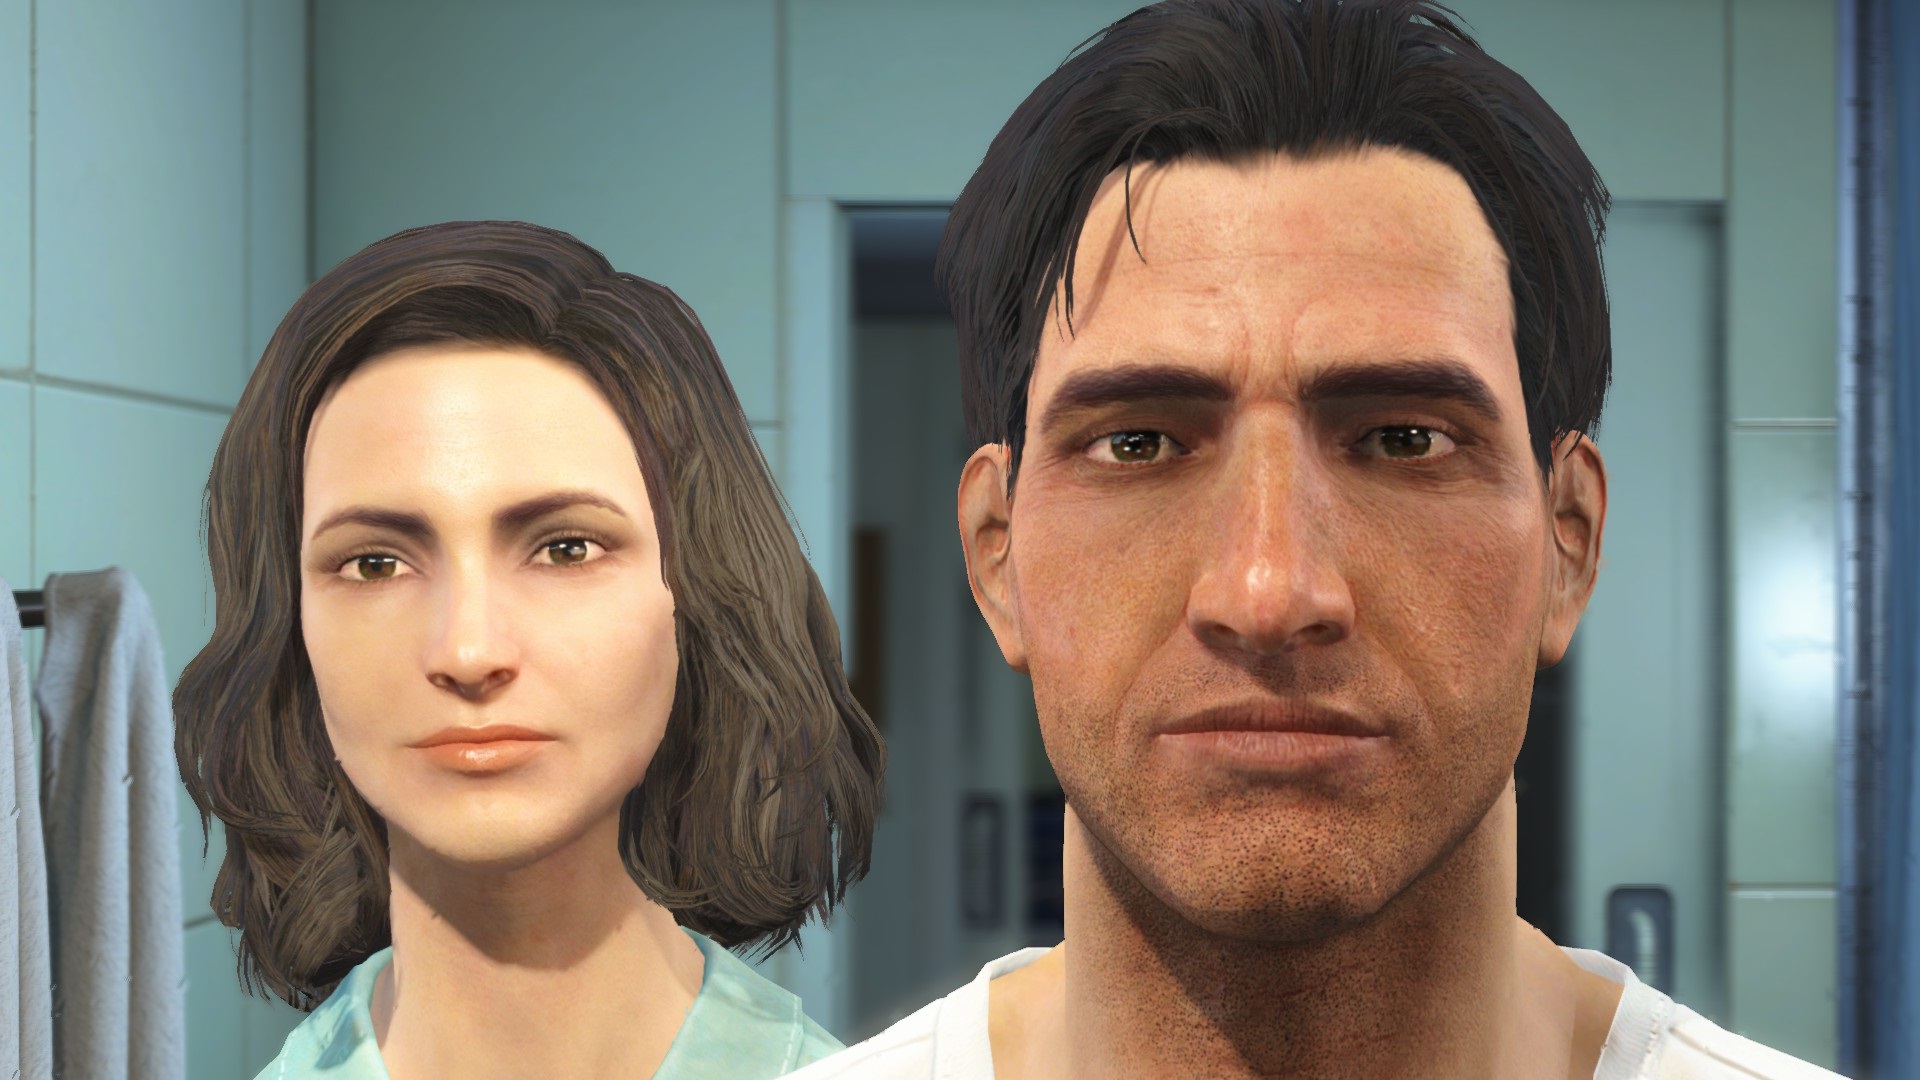 Uh, I guess Fallout 4's male protagonist is canonically a war criminal now